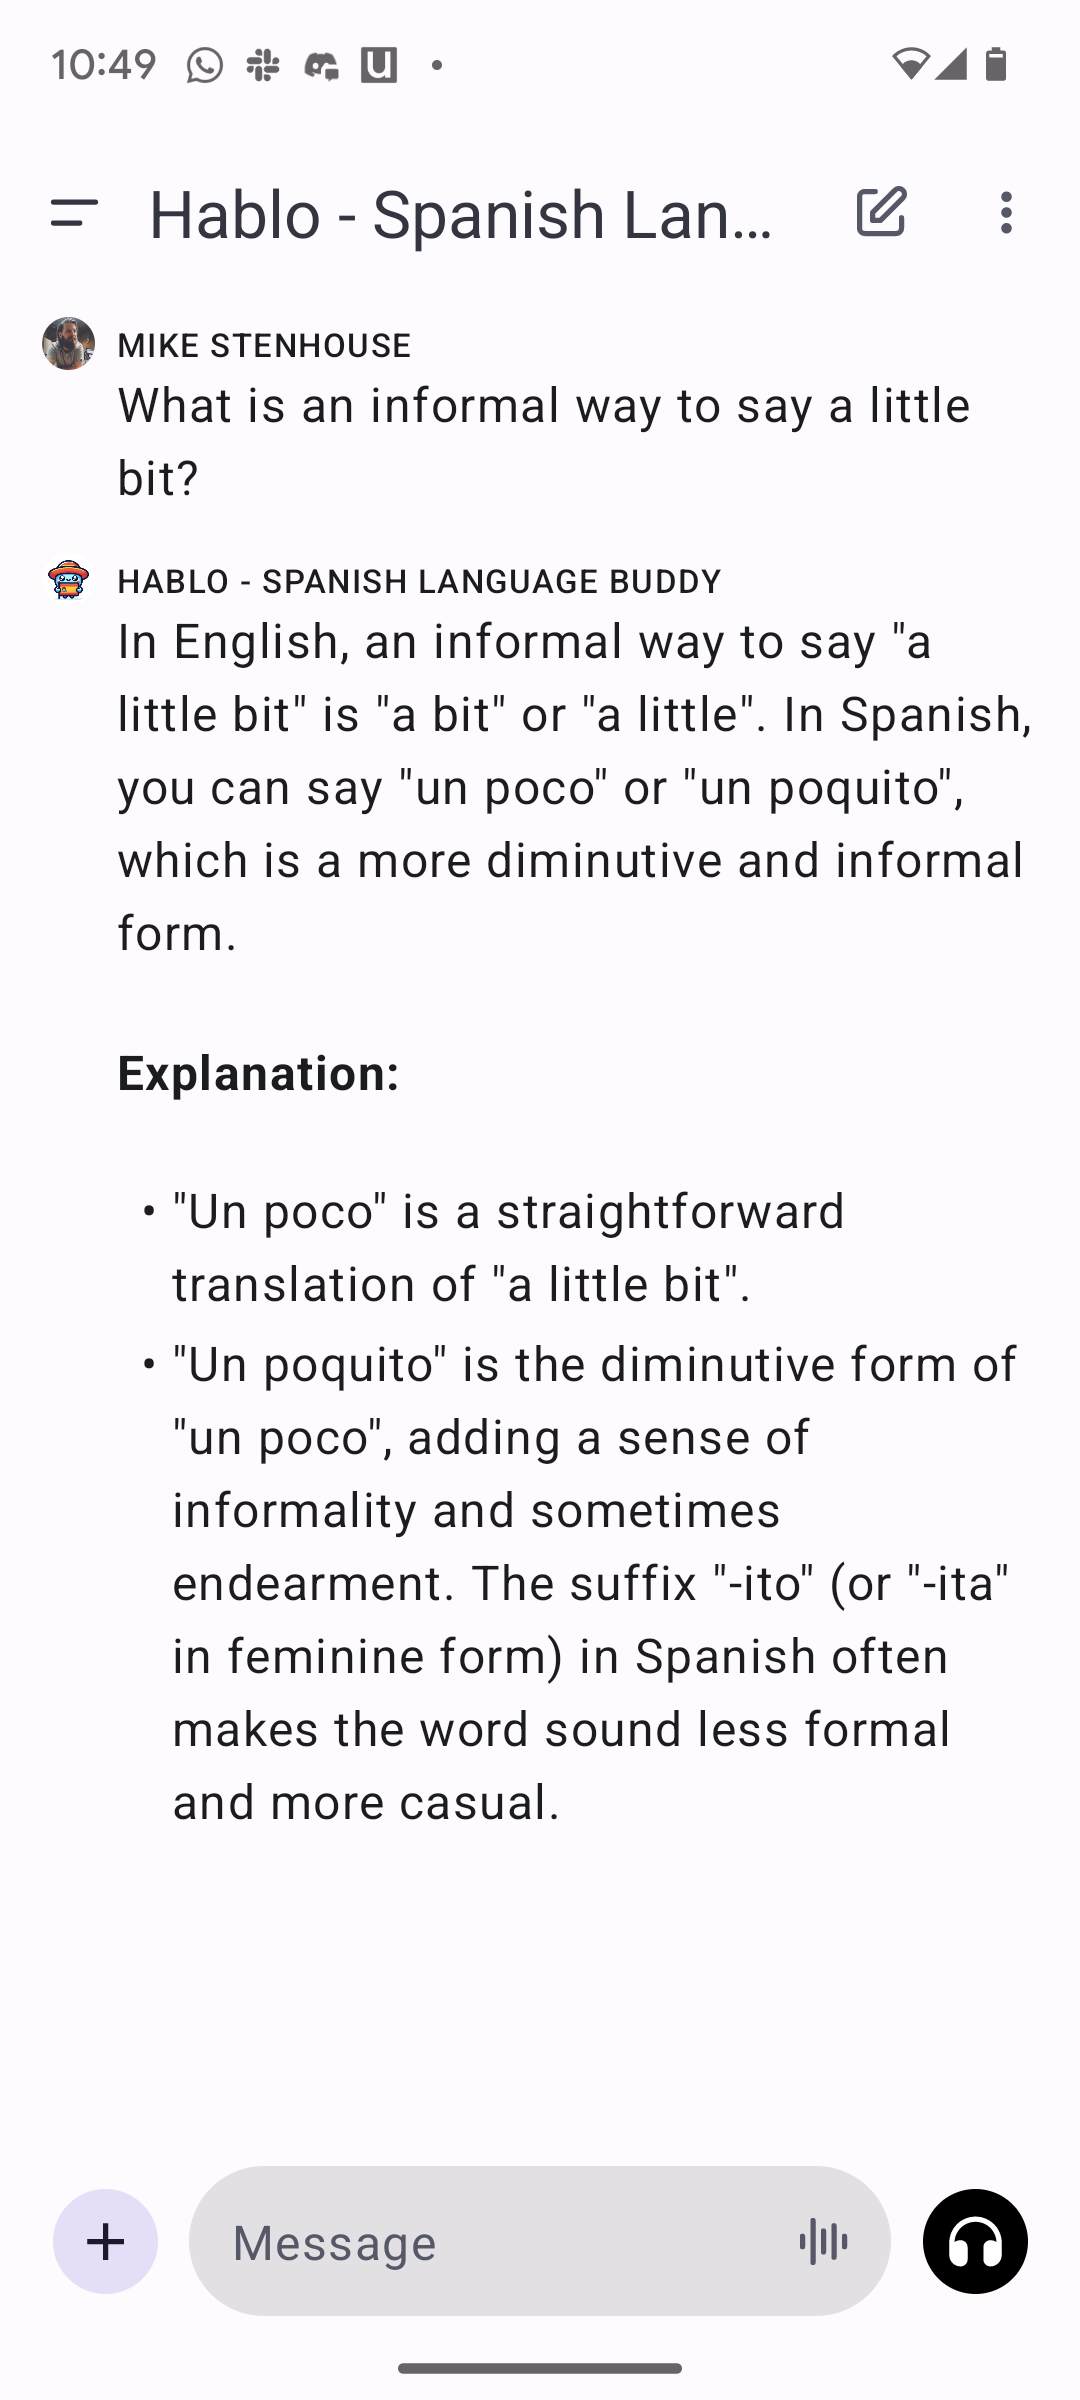 Example of Hablo explaining different turns of phrase to express 'a little bit' in Spanish.